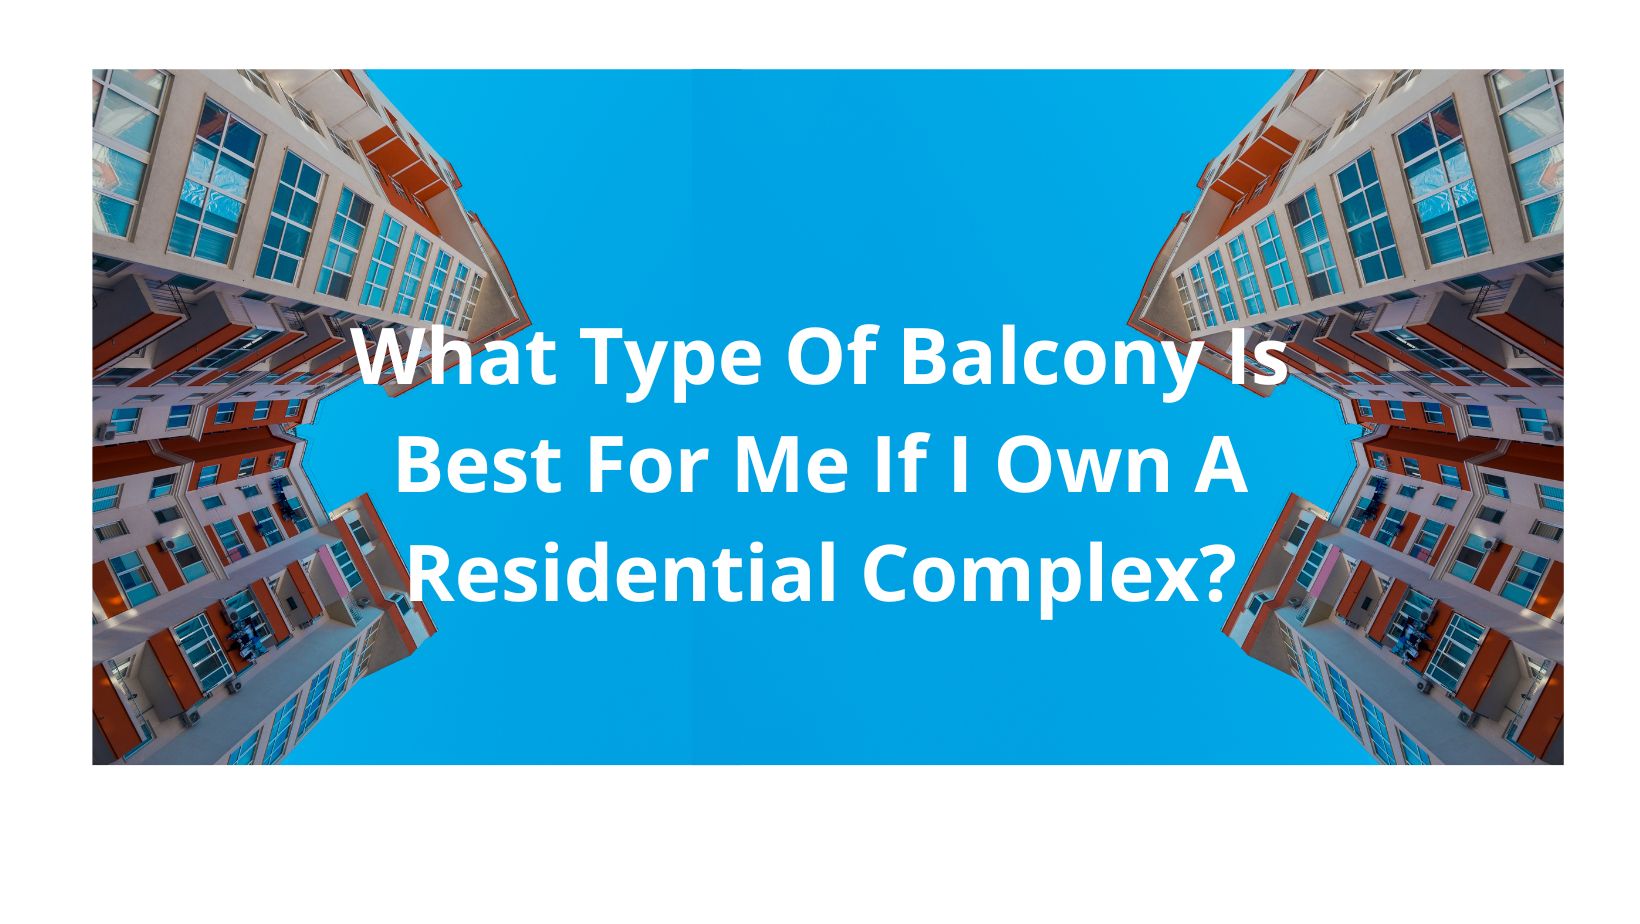 What Type Of Balcony Is Best For Me If I Own A Residential Complex